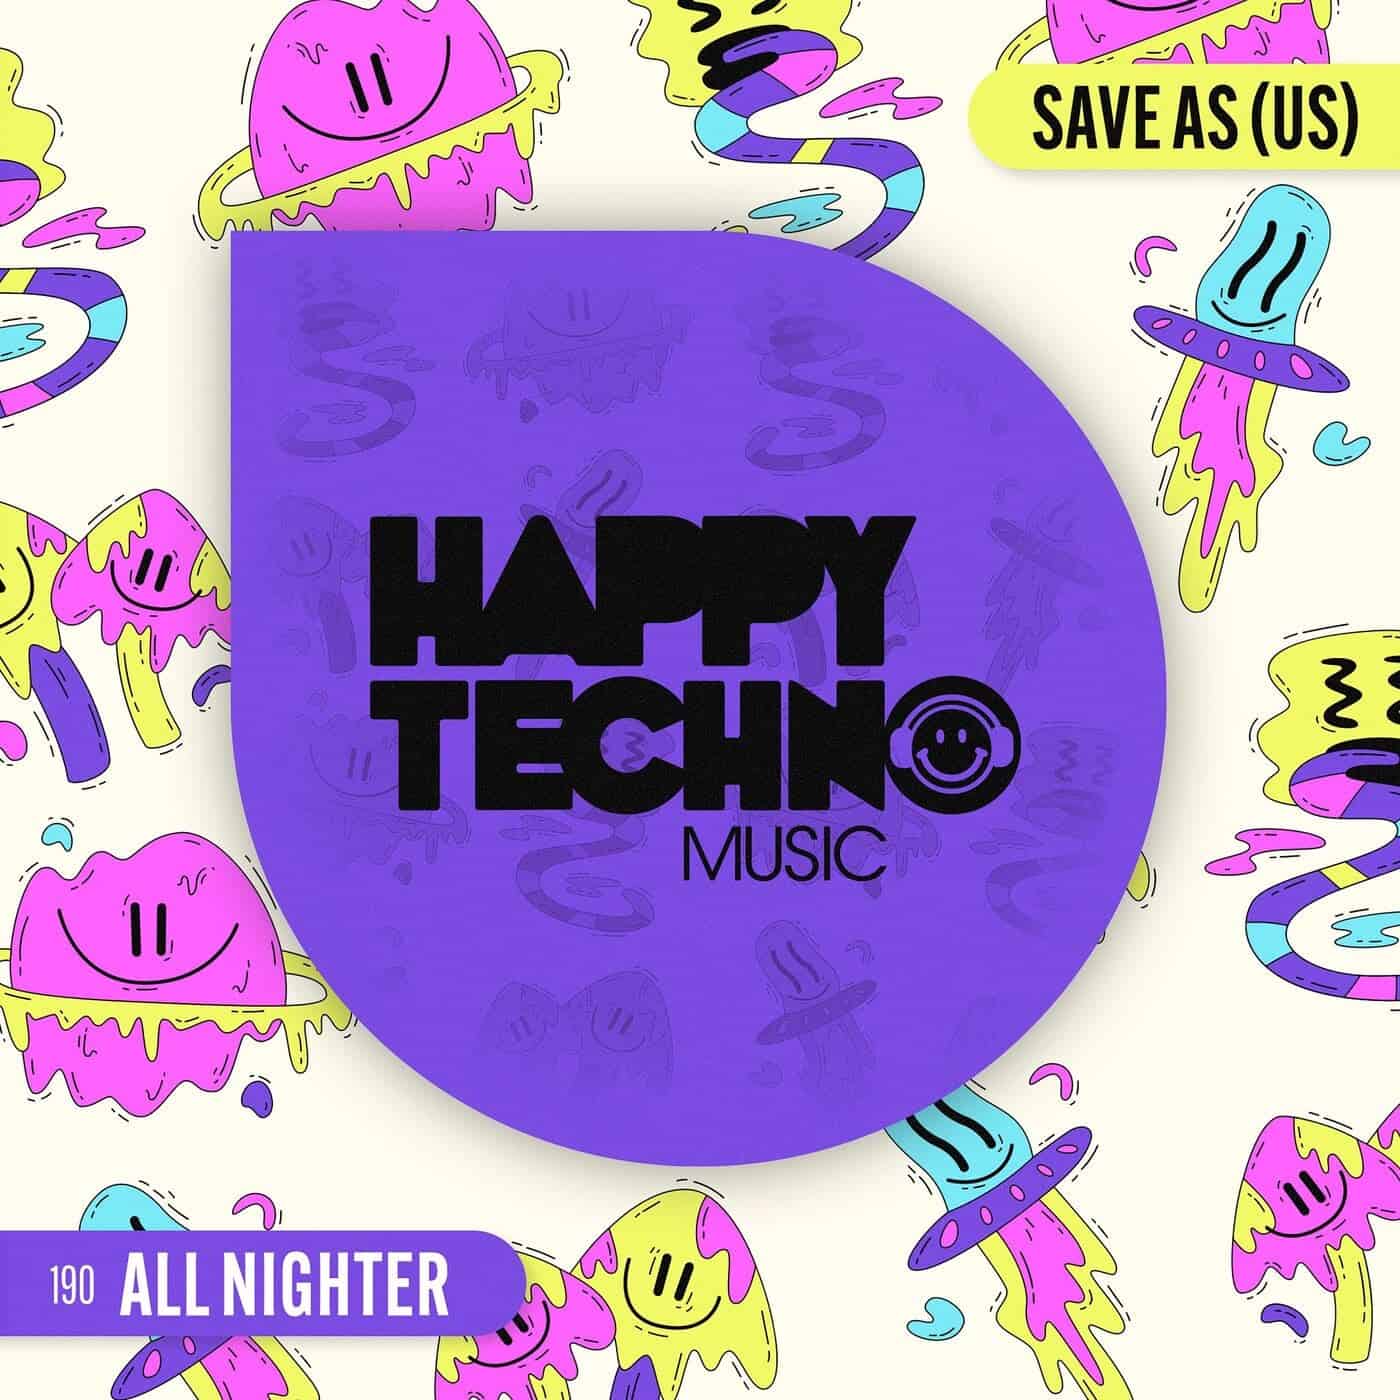 image cover: Save As (US) - All Nighter on Happy Techno Music